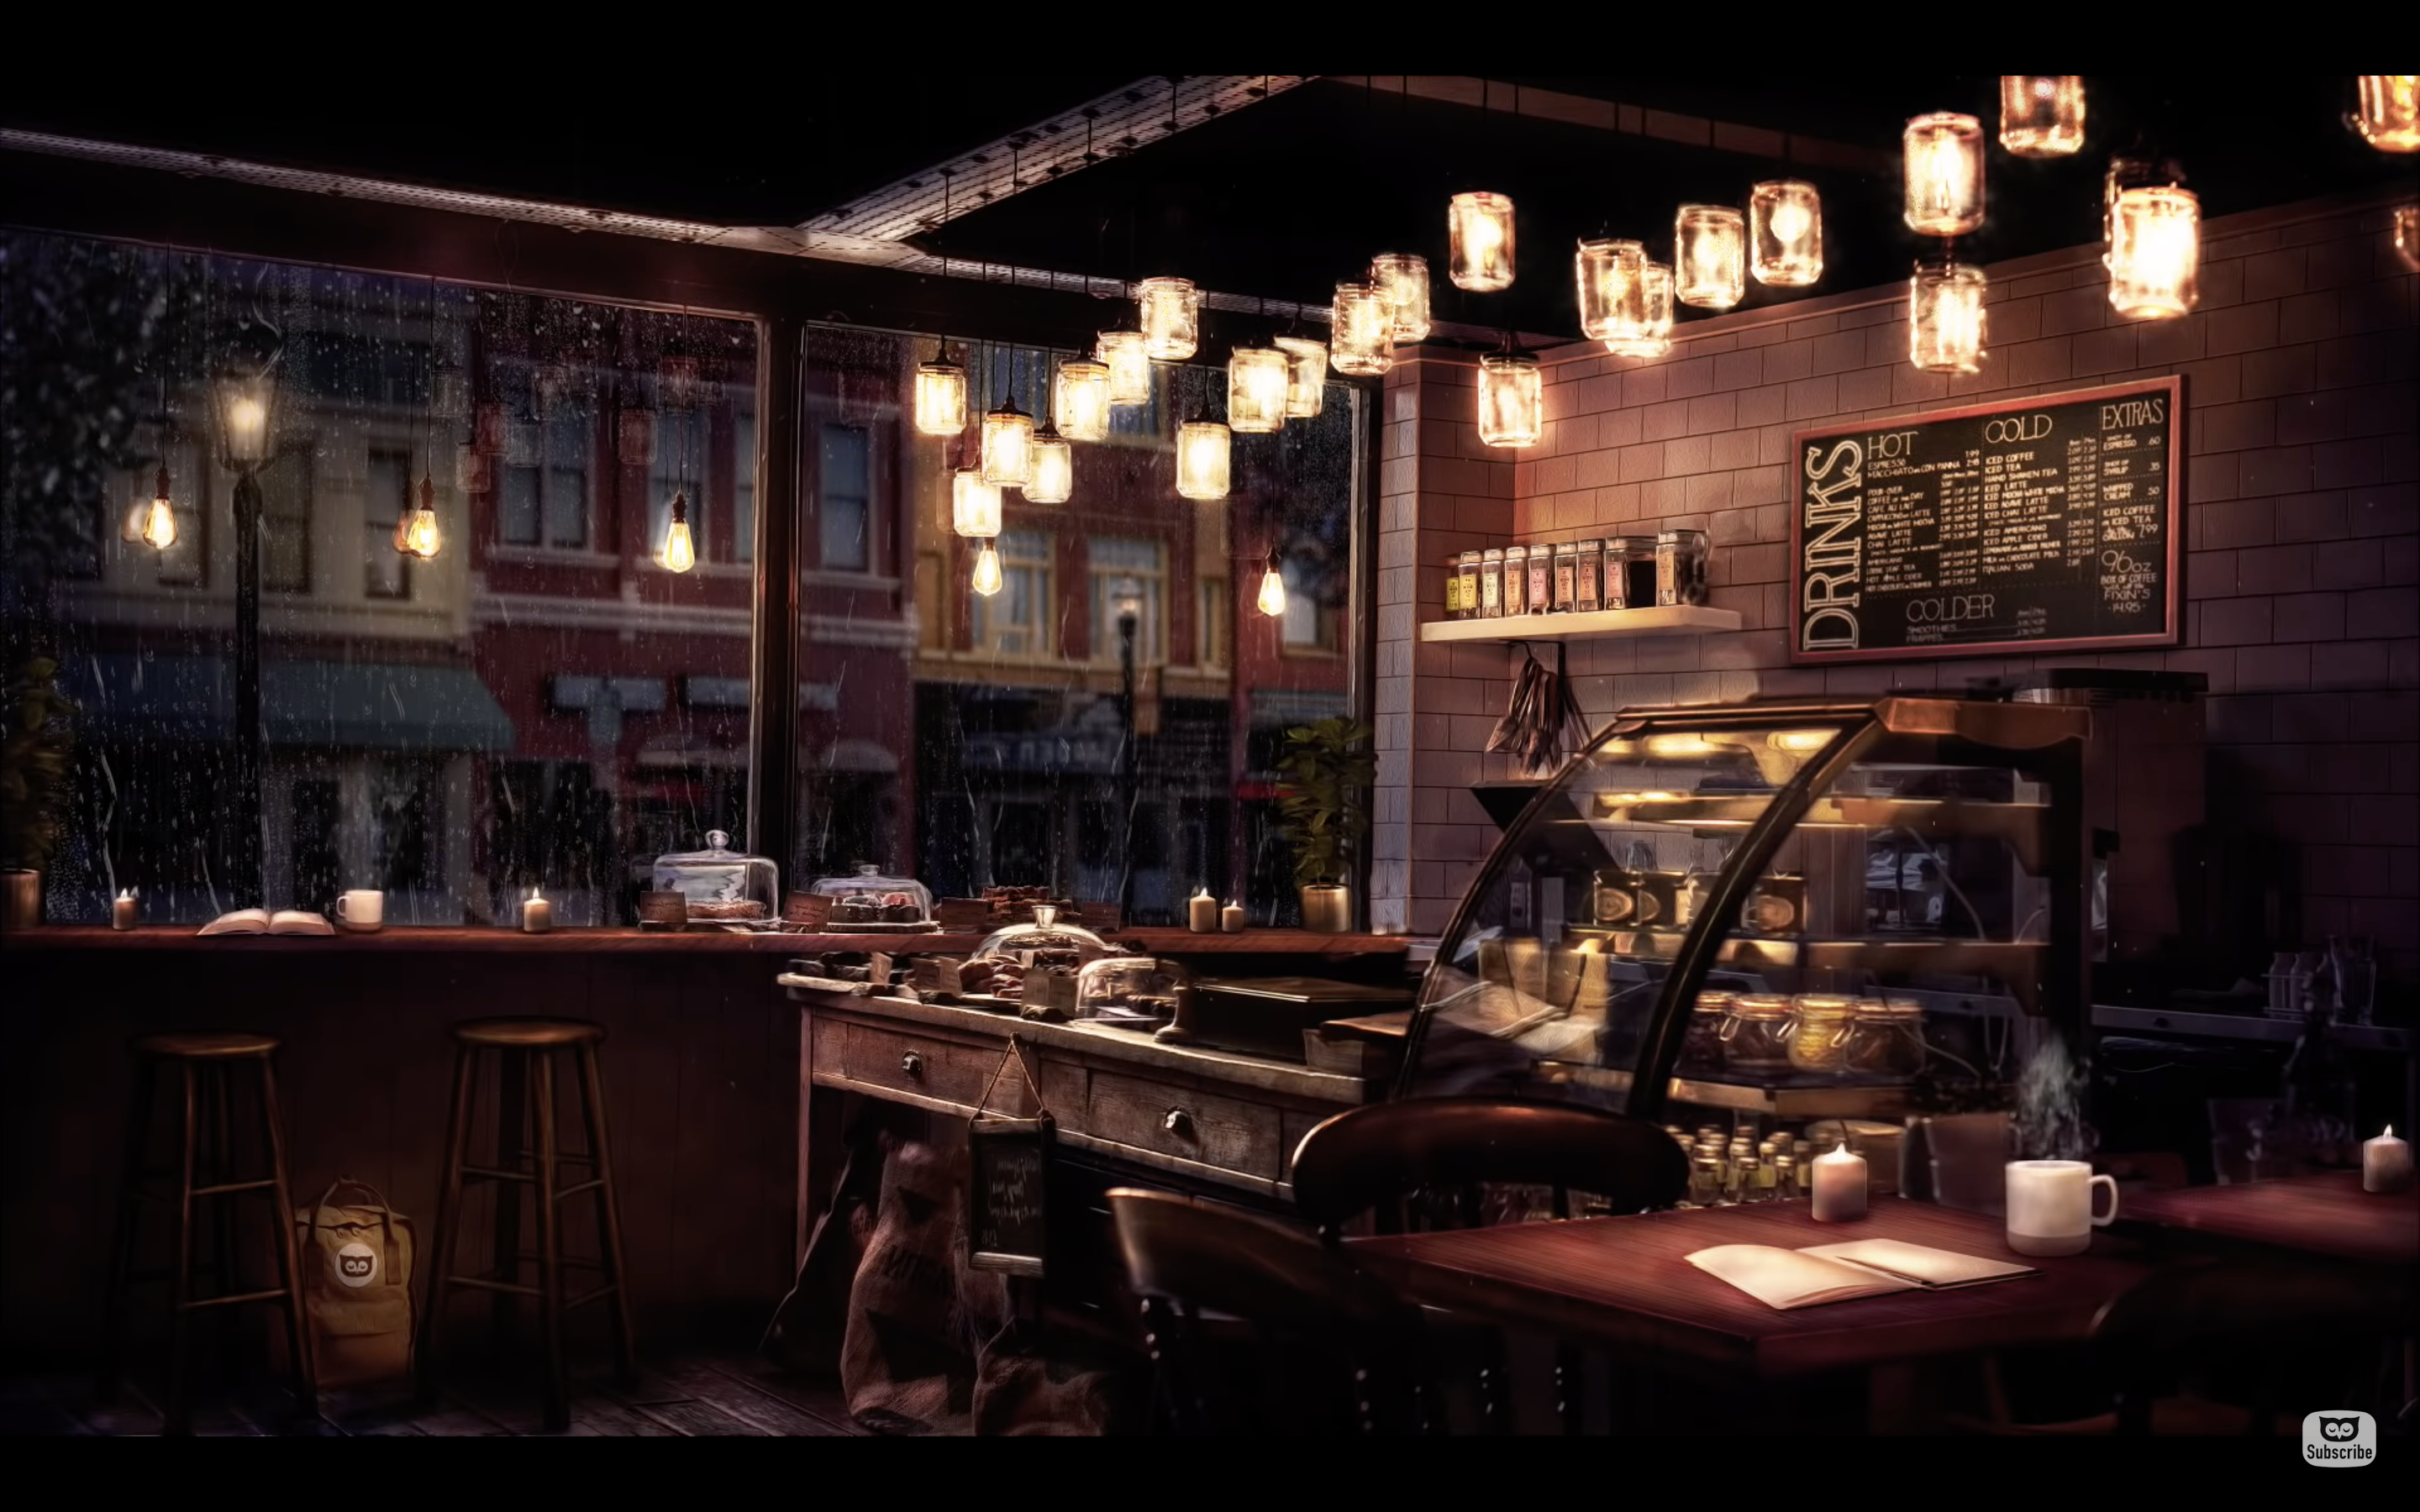 Screenshot of a YouTube "ambiance" video uploaded by Calmed By Nature that shows a digitally-created coffee shop in a rainy night.